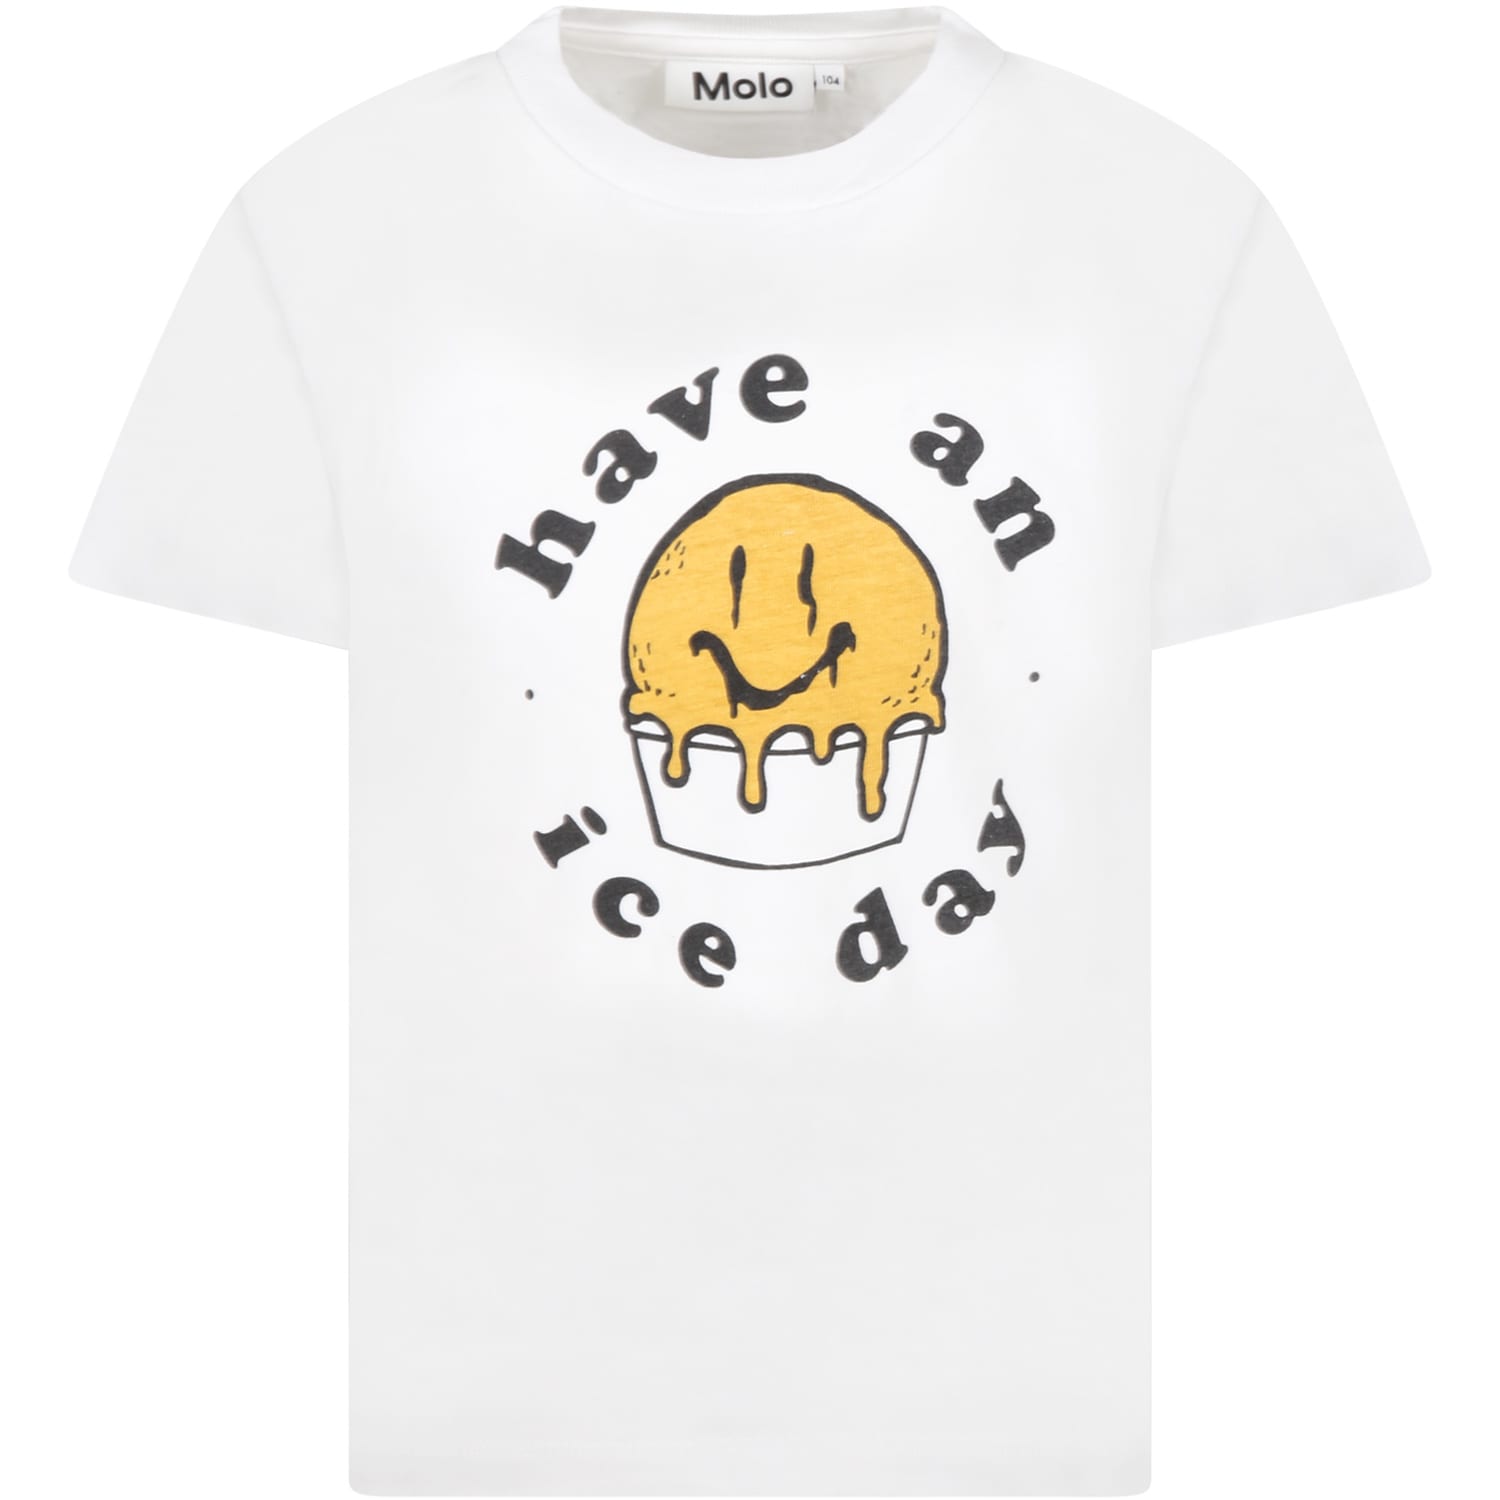 Molo White T-shirt For Kids With Smiley Face And Black Writing